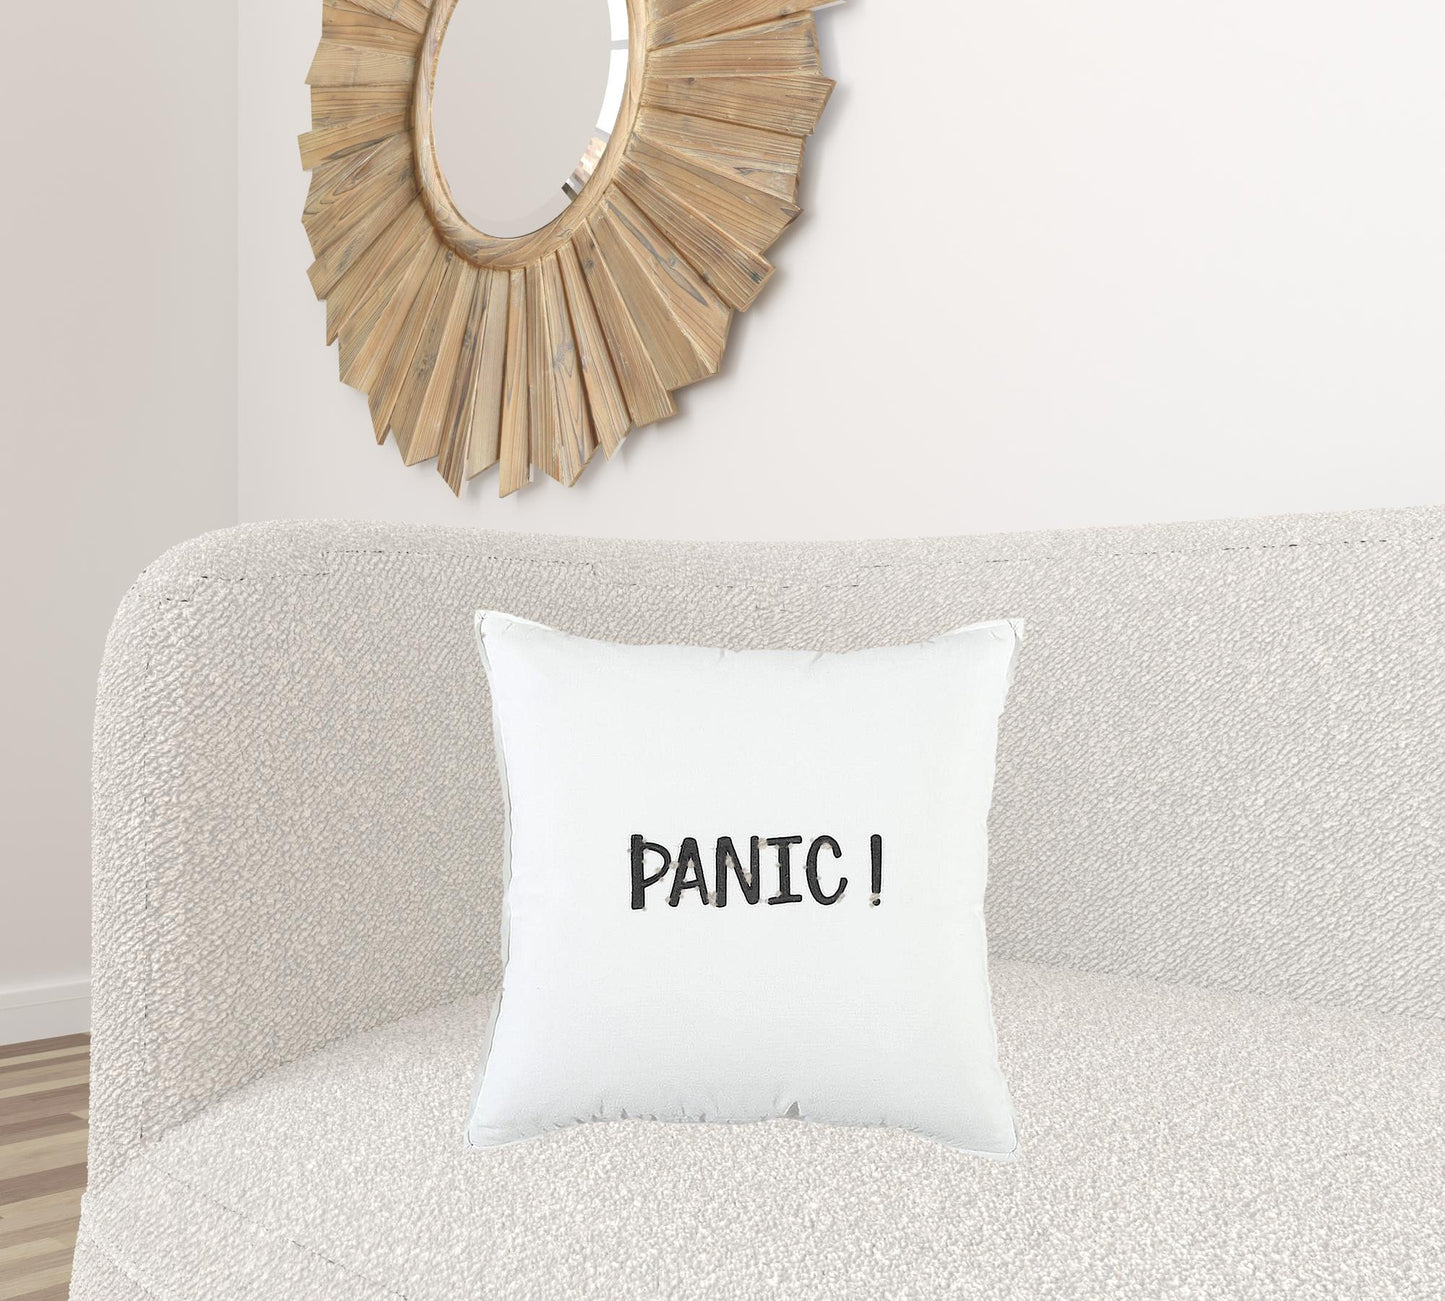 Black and White Flagship Message Throw Pillow